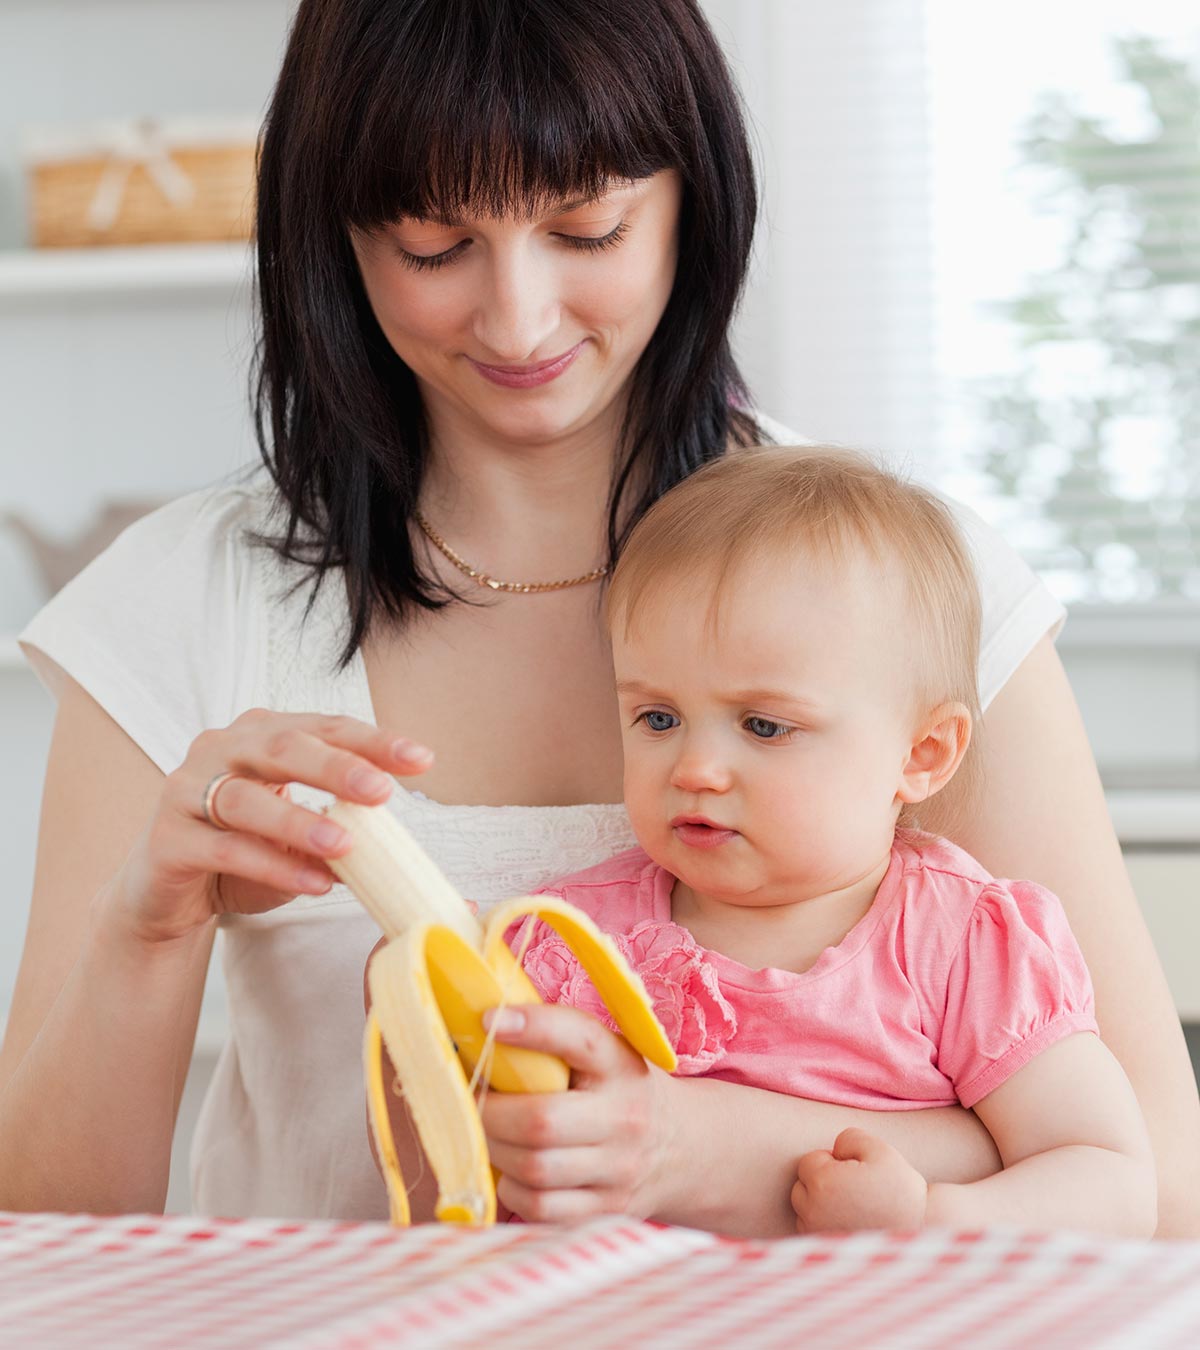 High Calorie Foods For Babies